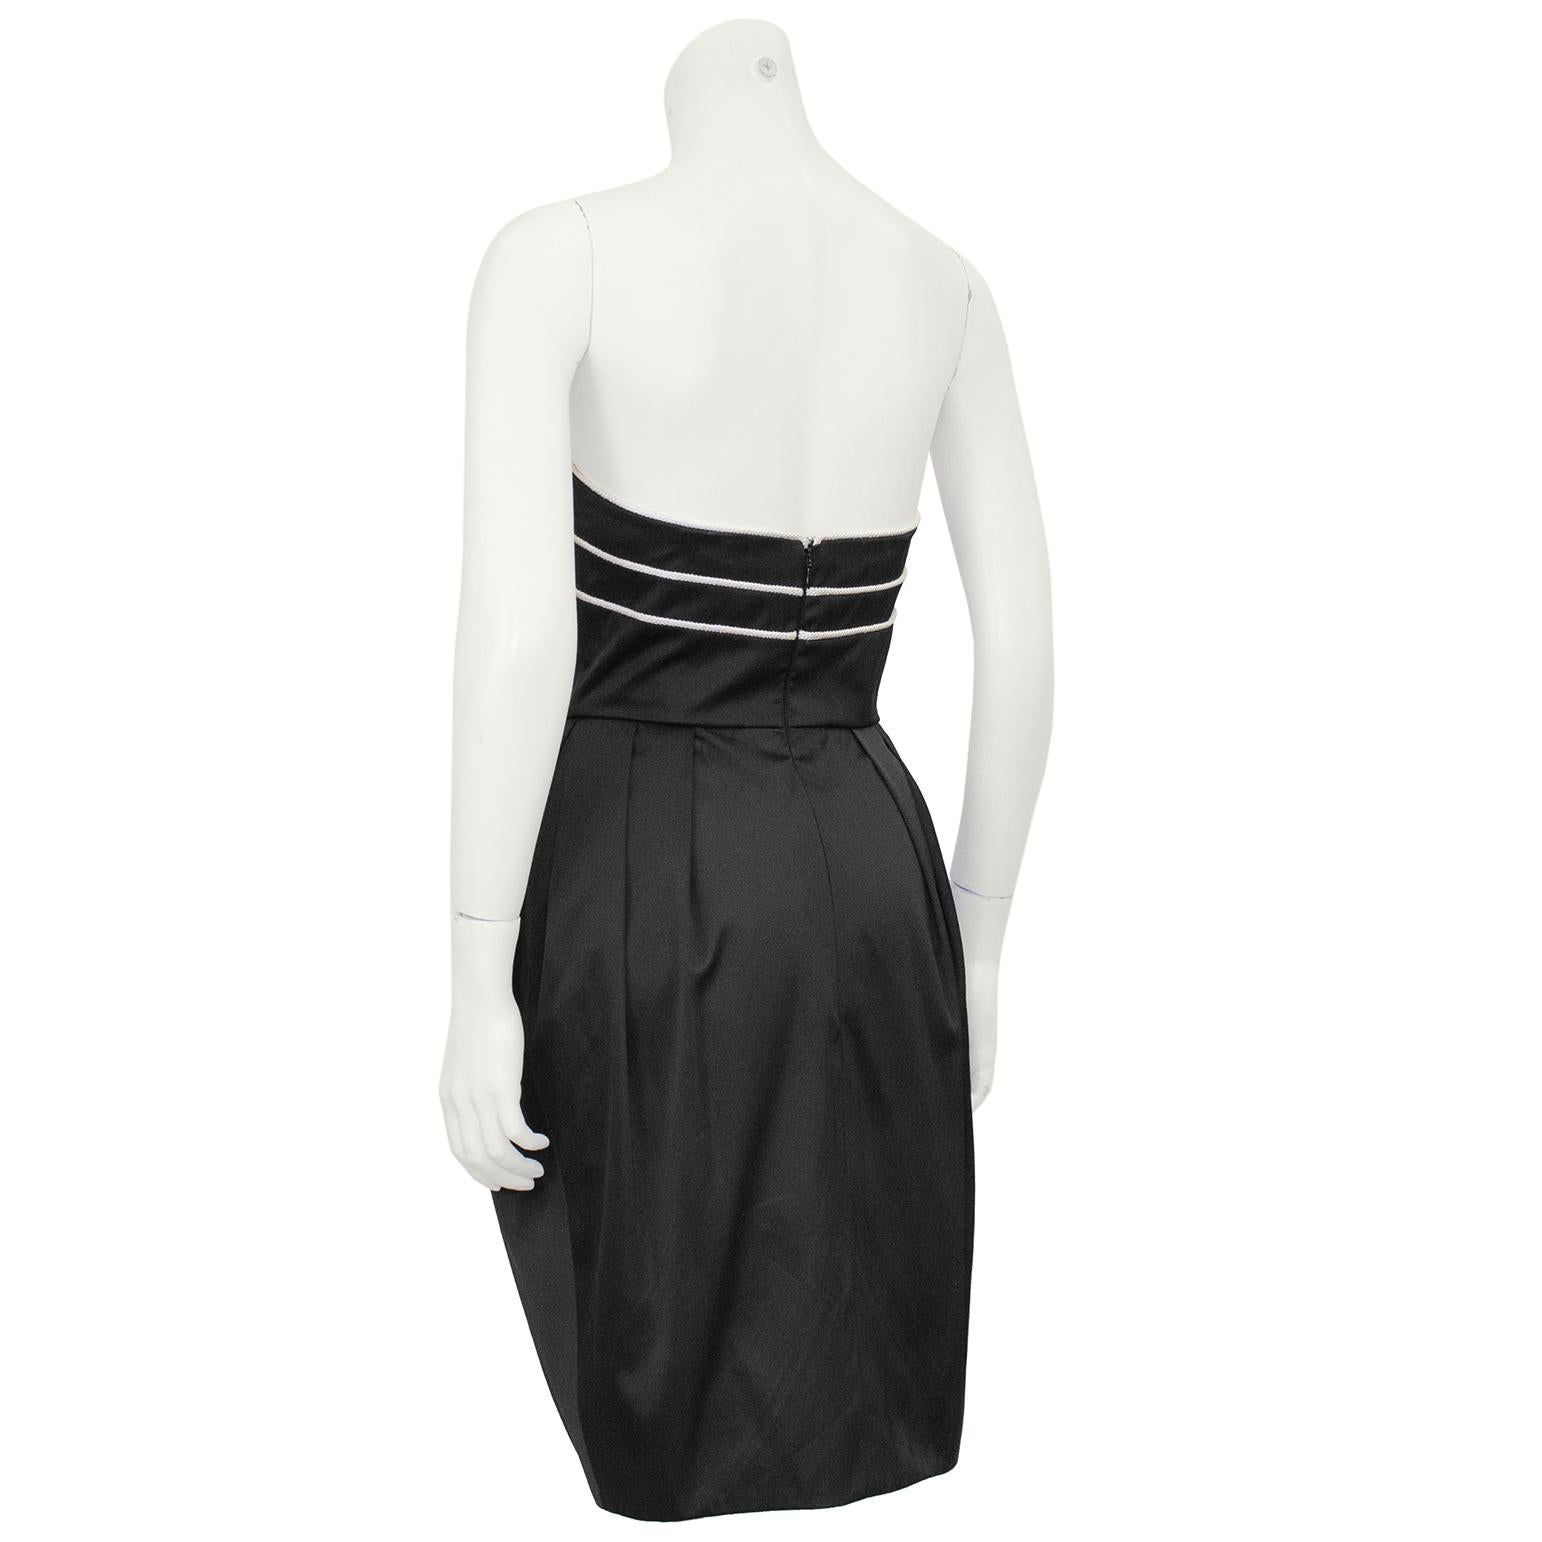 1980s Lanvin Black Satin Cocktail Dress with White Piping In Good Condition For Sale In Toronto, Ontario